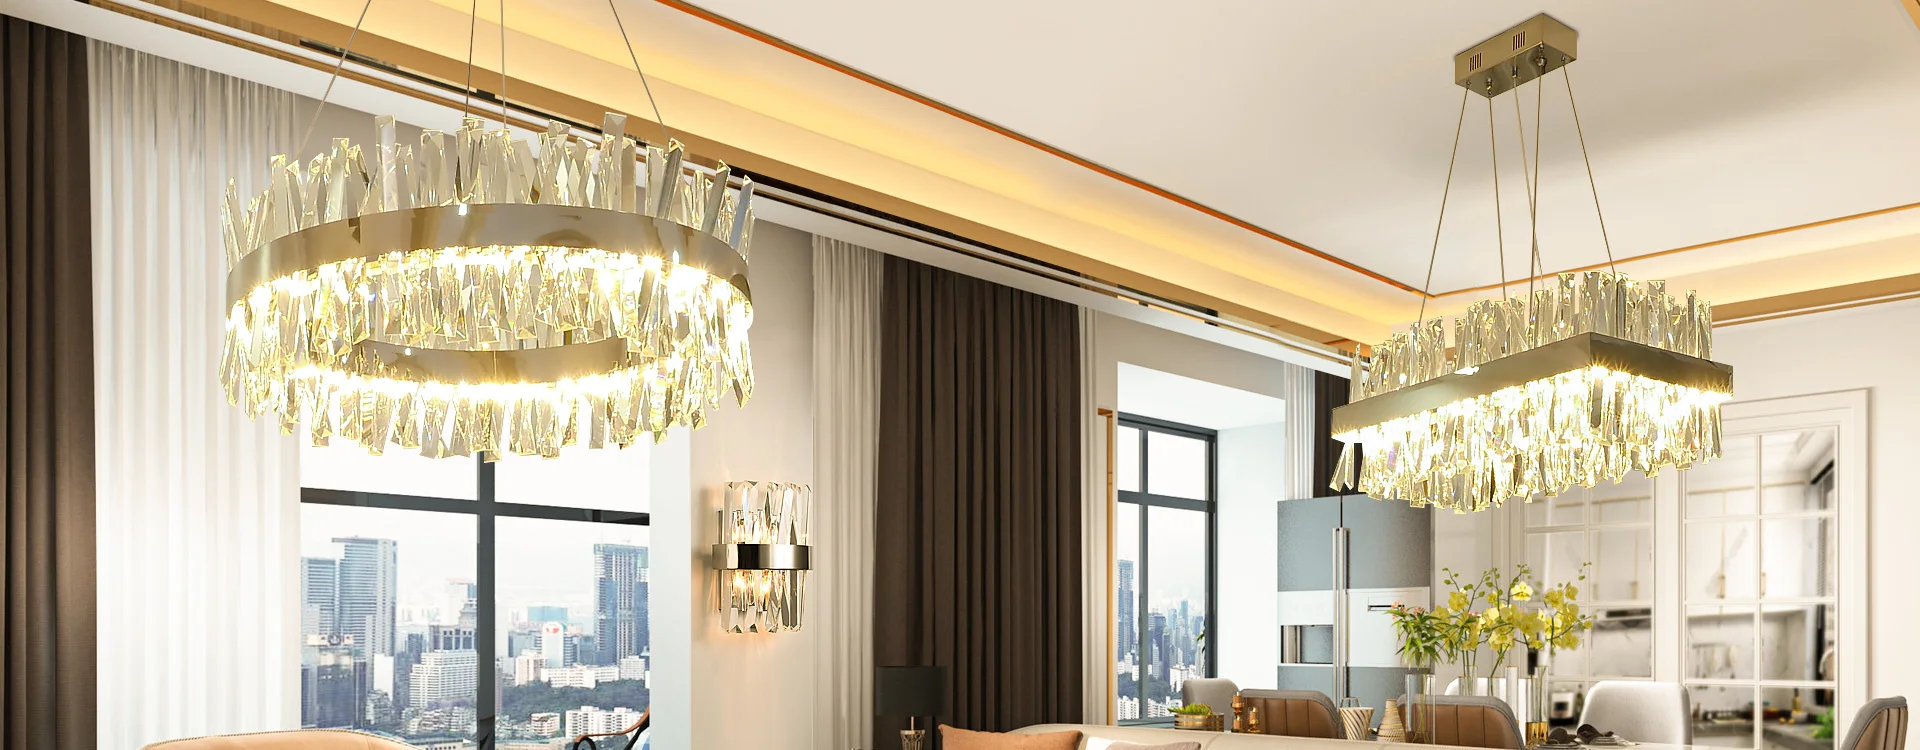 wall lamp light Style Combinations Of Modern Light Luxury Crystal Gold Wall Lamps In Bedrooms, Beds, Living Rooms, Decorative LED Lights sconce light fixture